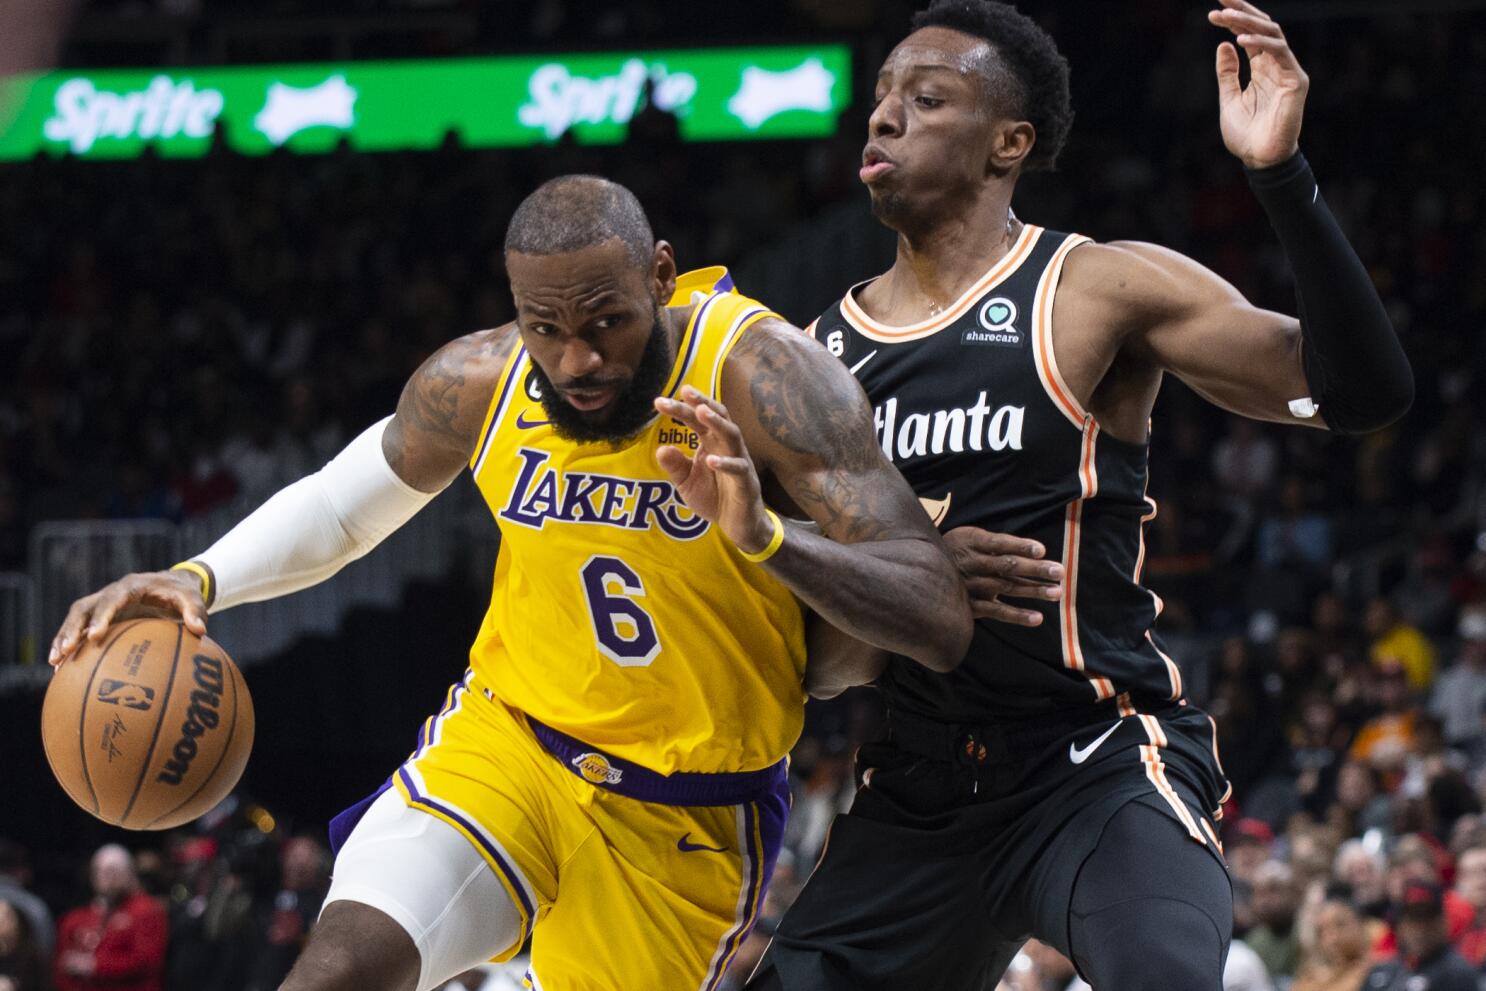 James has season-high 47 points on 38th birthday, Lakers win - The